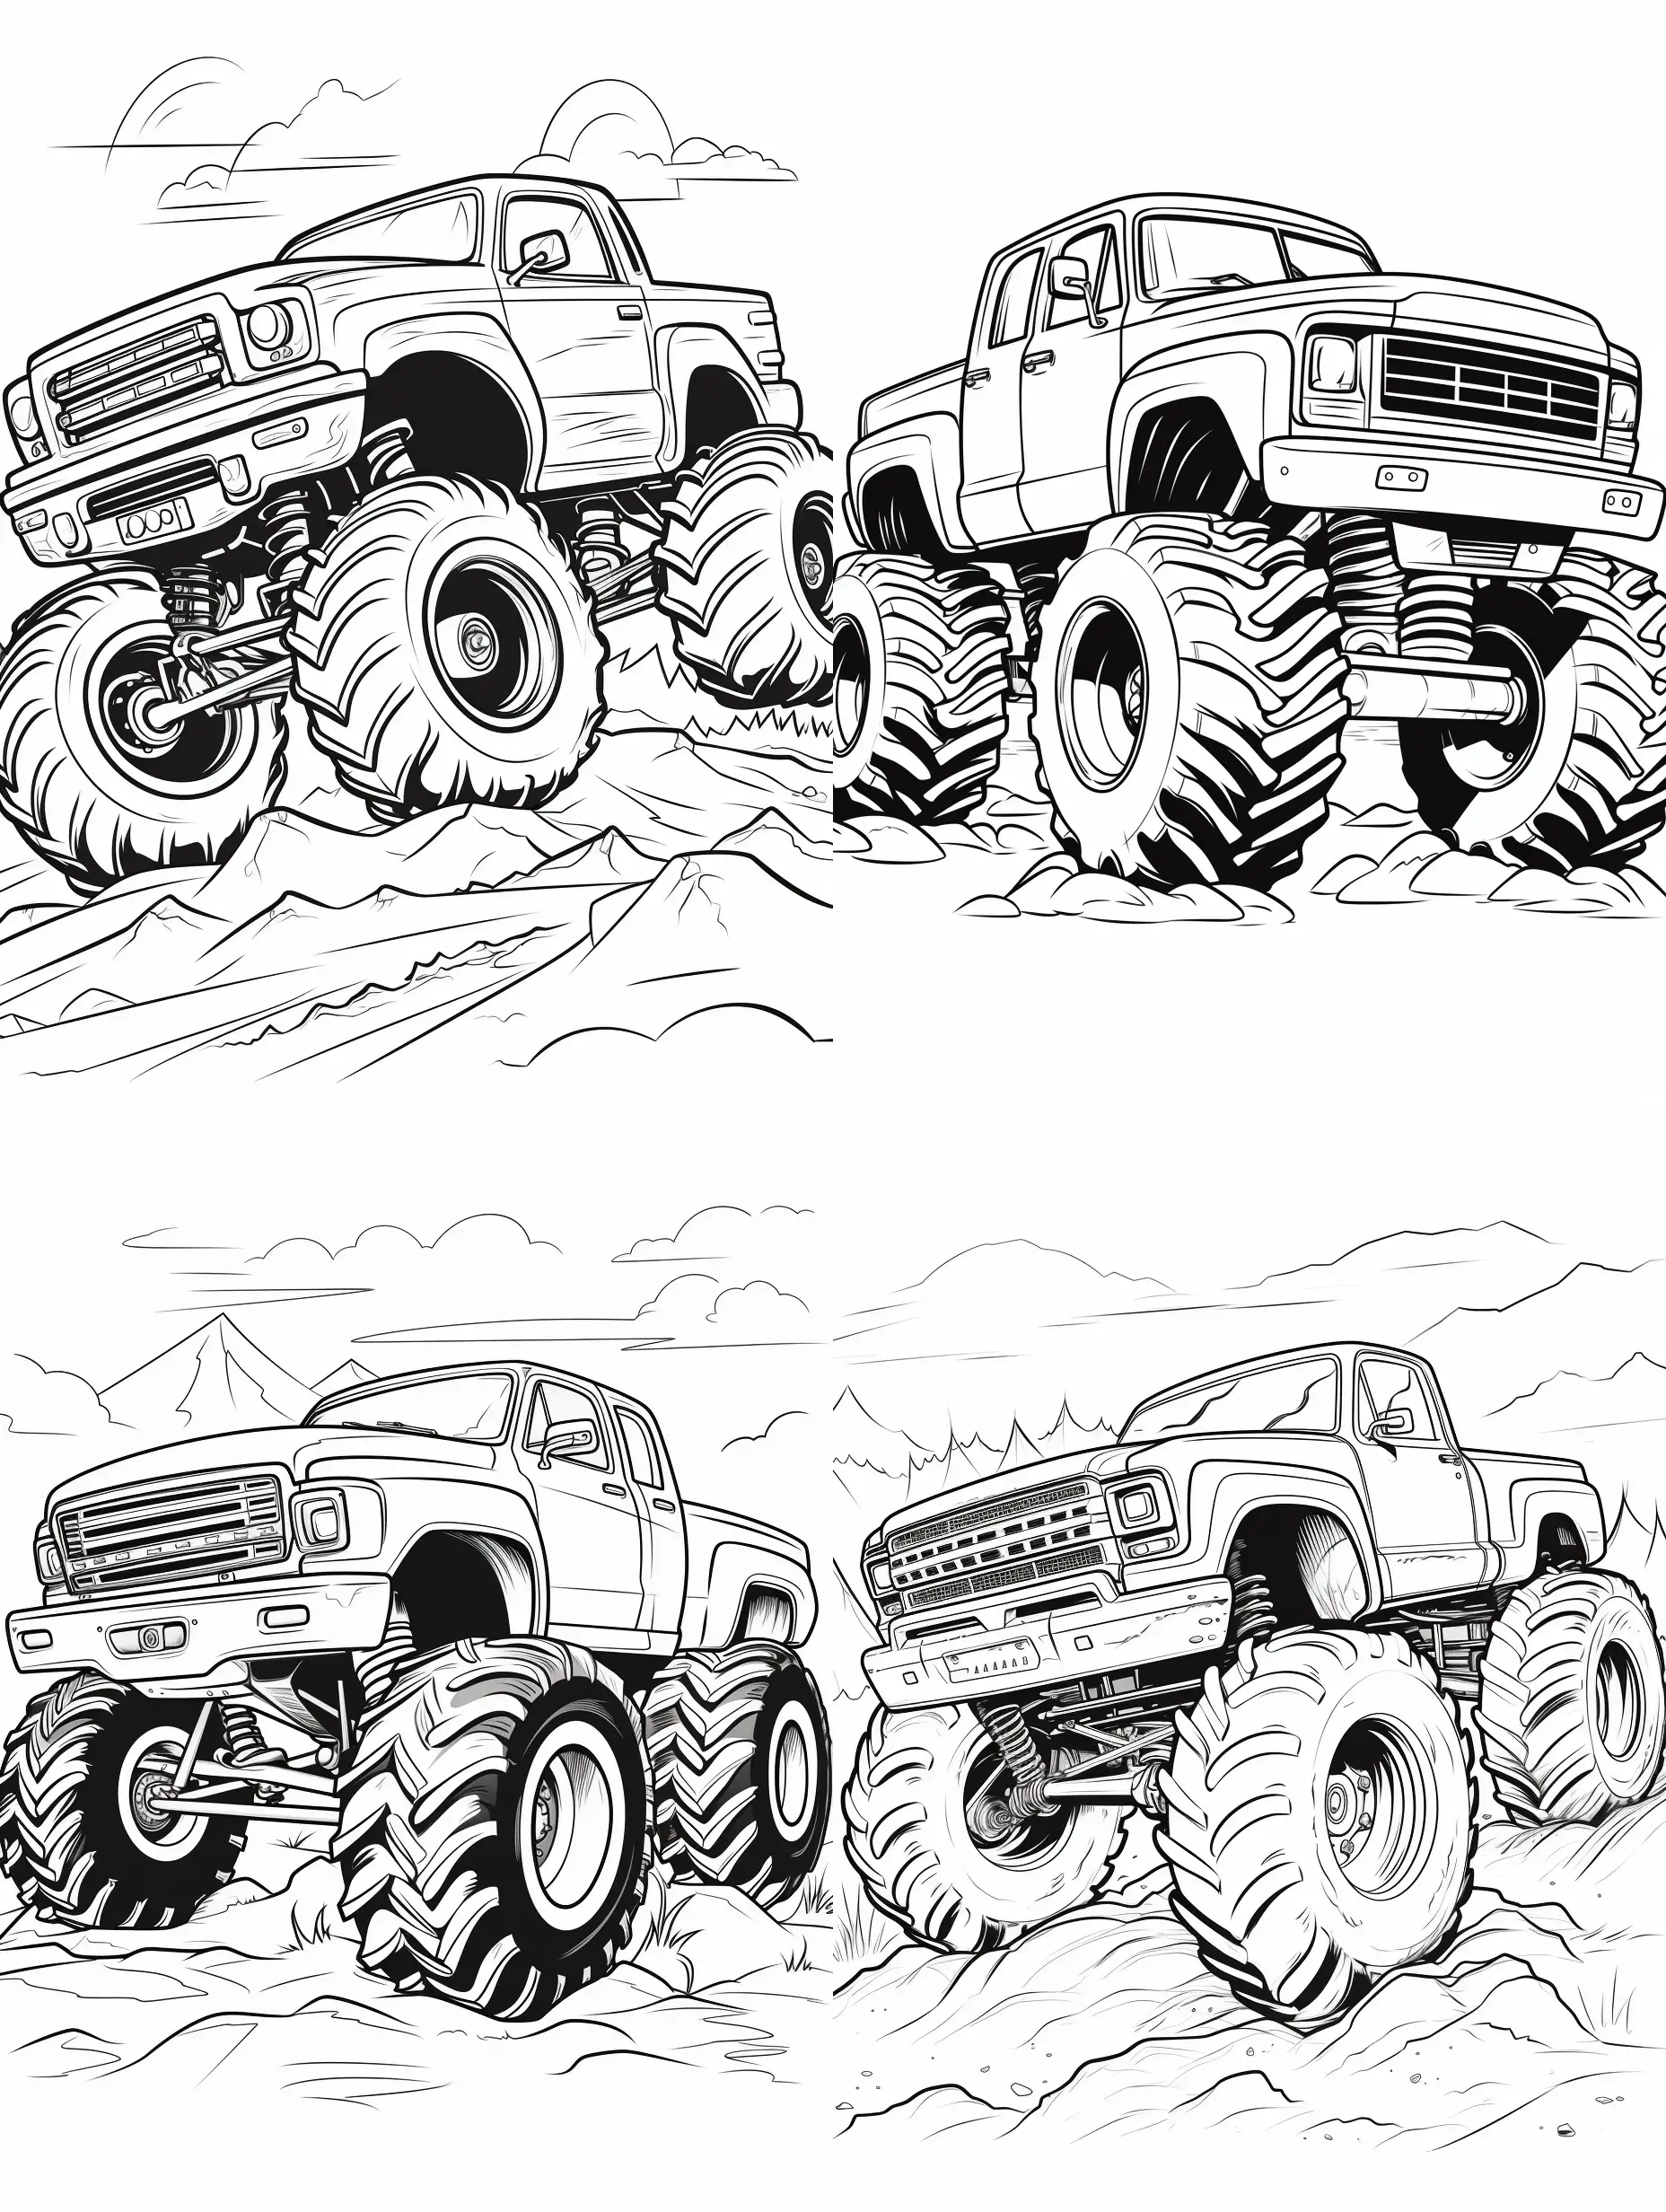 Monochrome-Cartoon-Monster-Truck-Coloring-Page-for-Creative-Fun